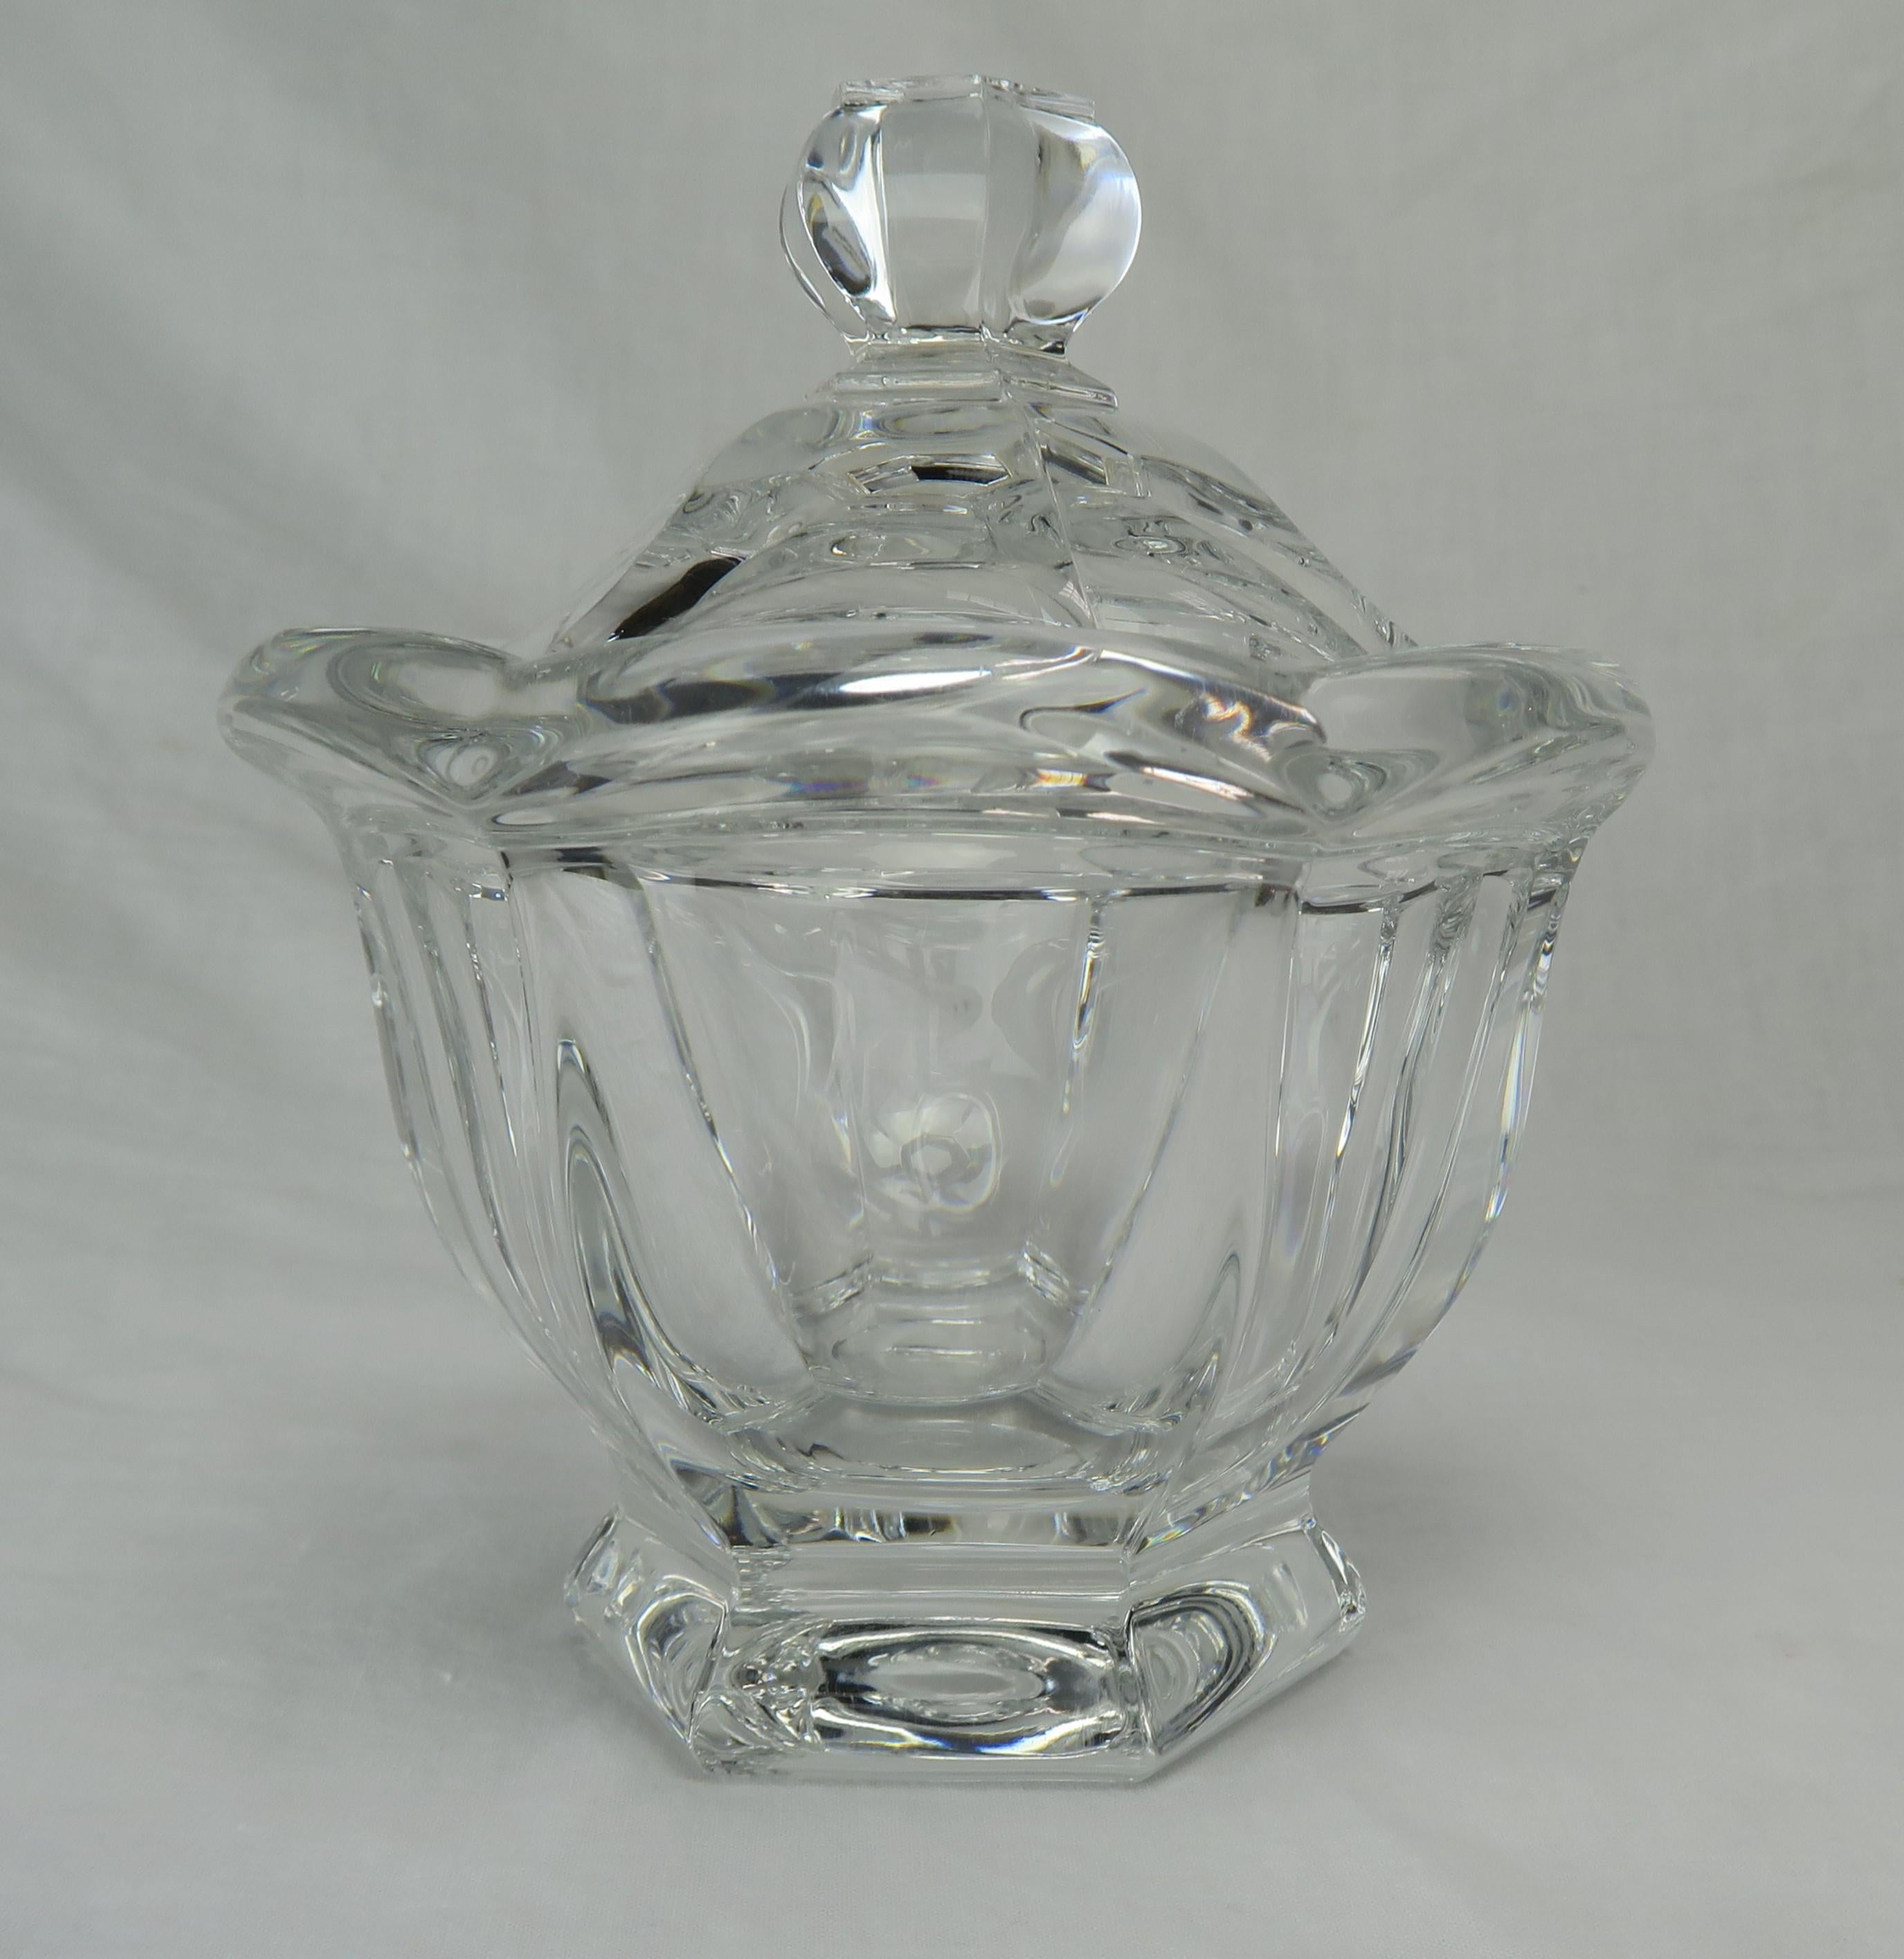 Beautiful and substantial Baccarat Harcourt Missouri jam or sauce jar with nice heavy feel and subtle scallop edge. It looks great on both a modern or traditional table. Baccarat mark on both lid and base. This item is provided without its spoon.